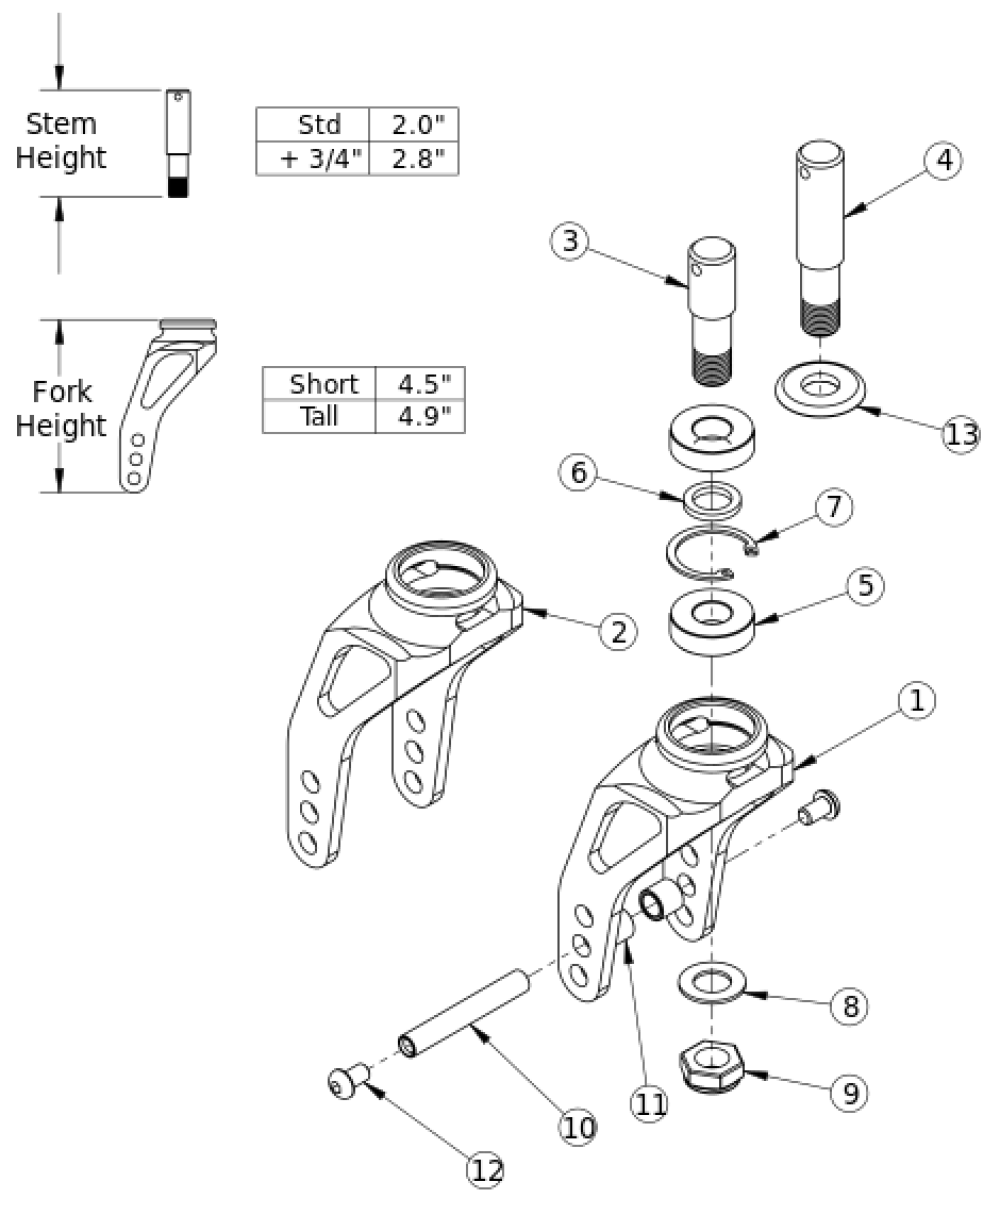 (discontinued) Rogue Caster Forks And Stems parts diagram